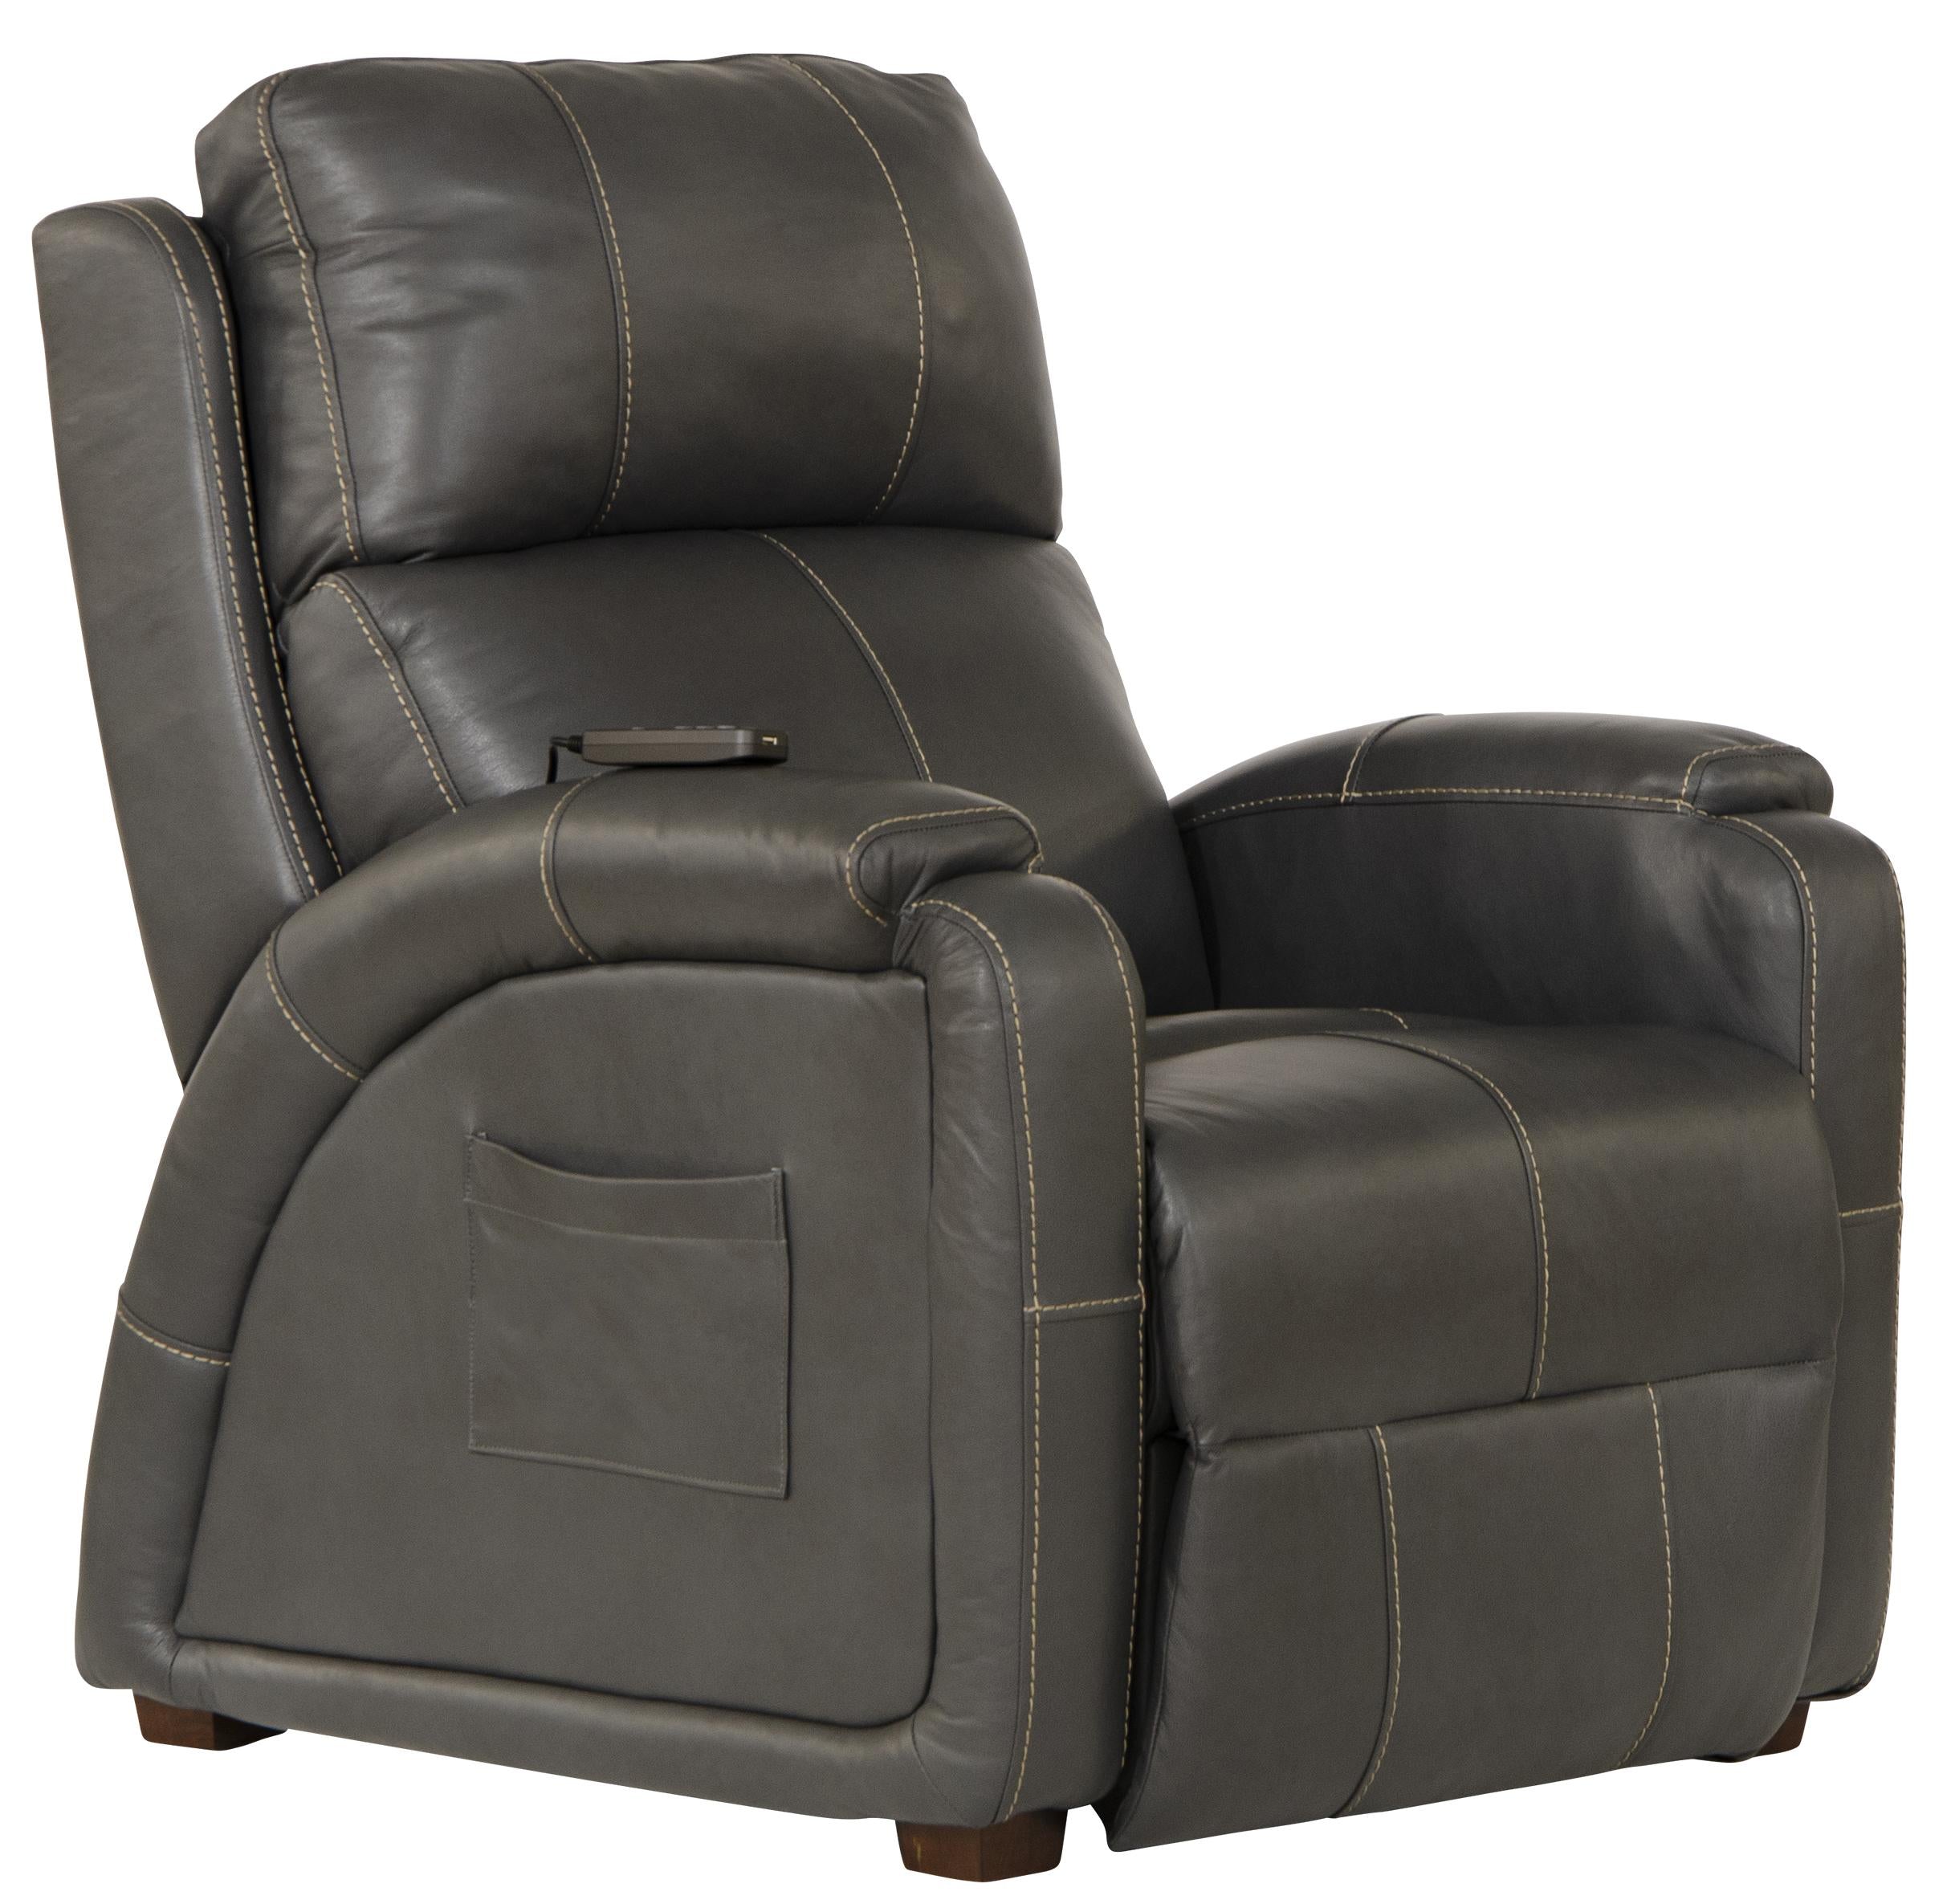 Reliever Leather Power Lay Flat Recliner with Power Adjustable Headrest and Lumbar, Zero Gravity and CR3 Therapeutic Massage